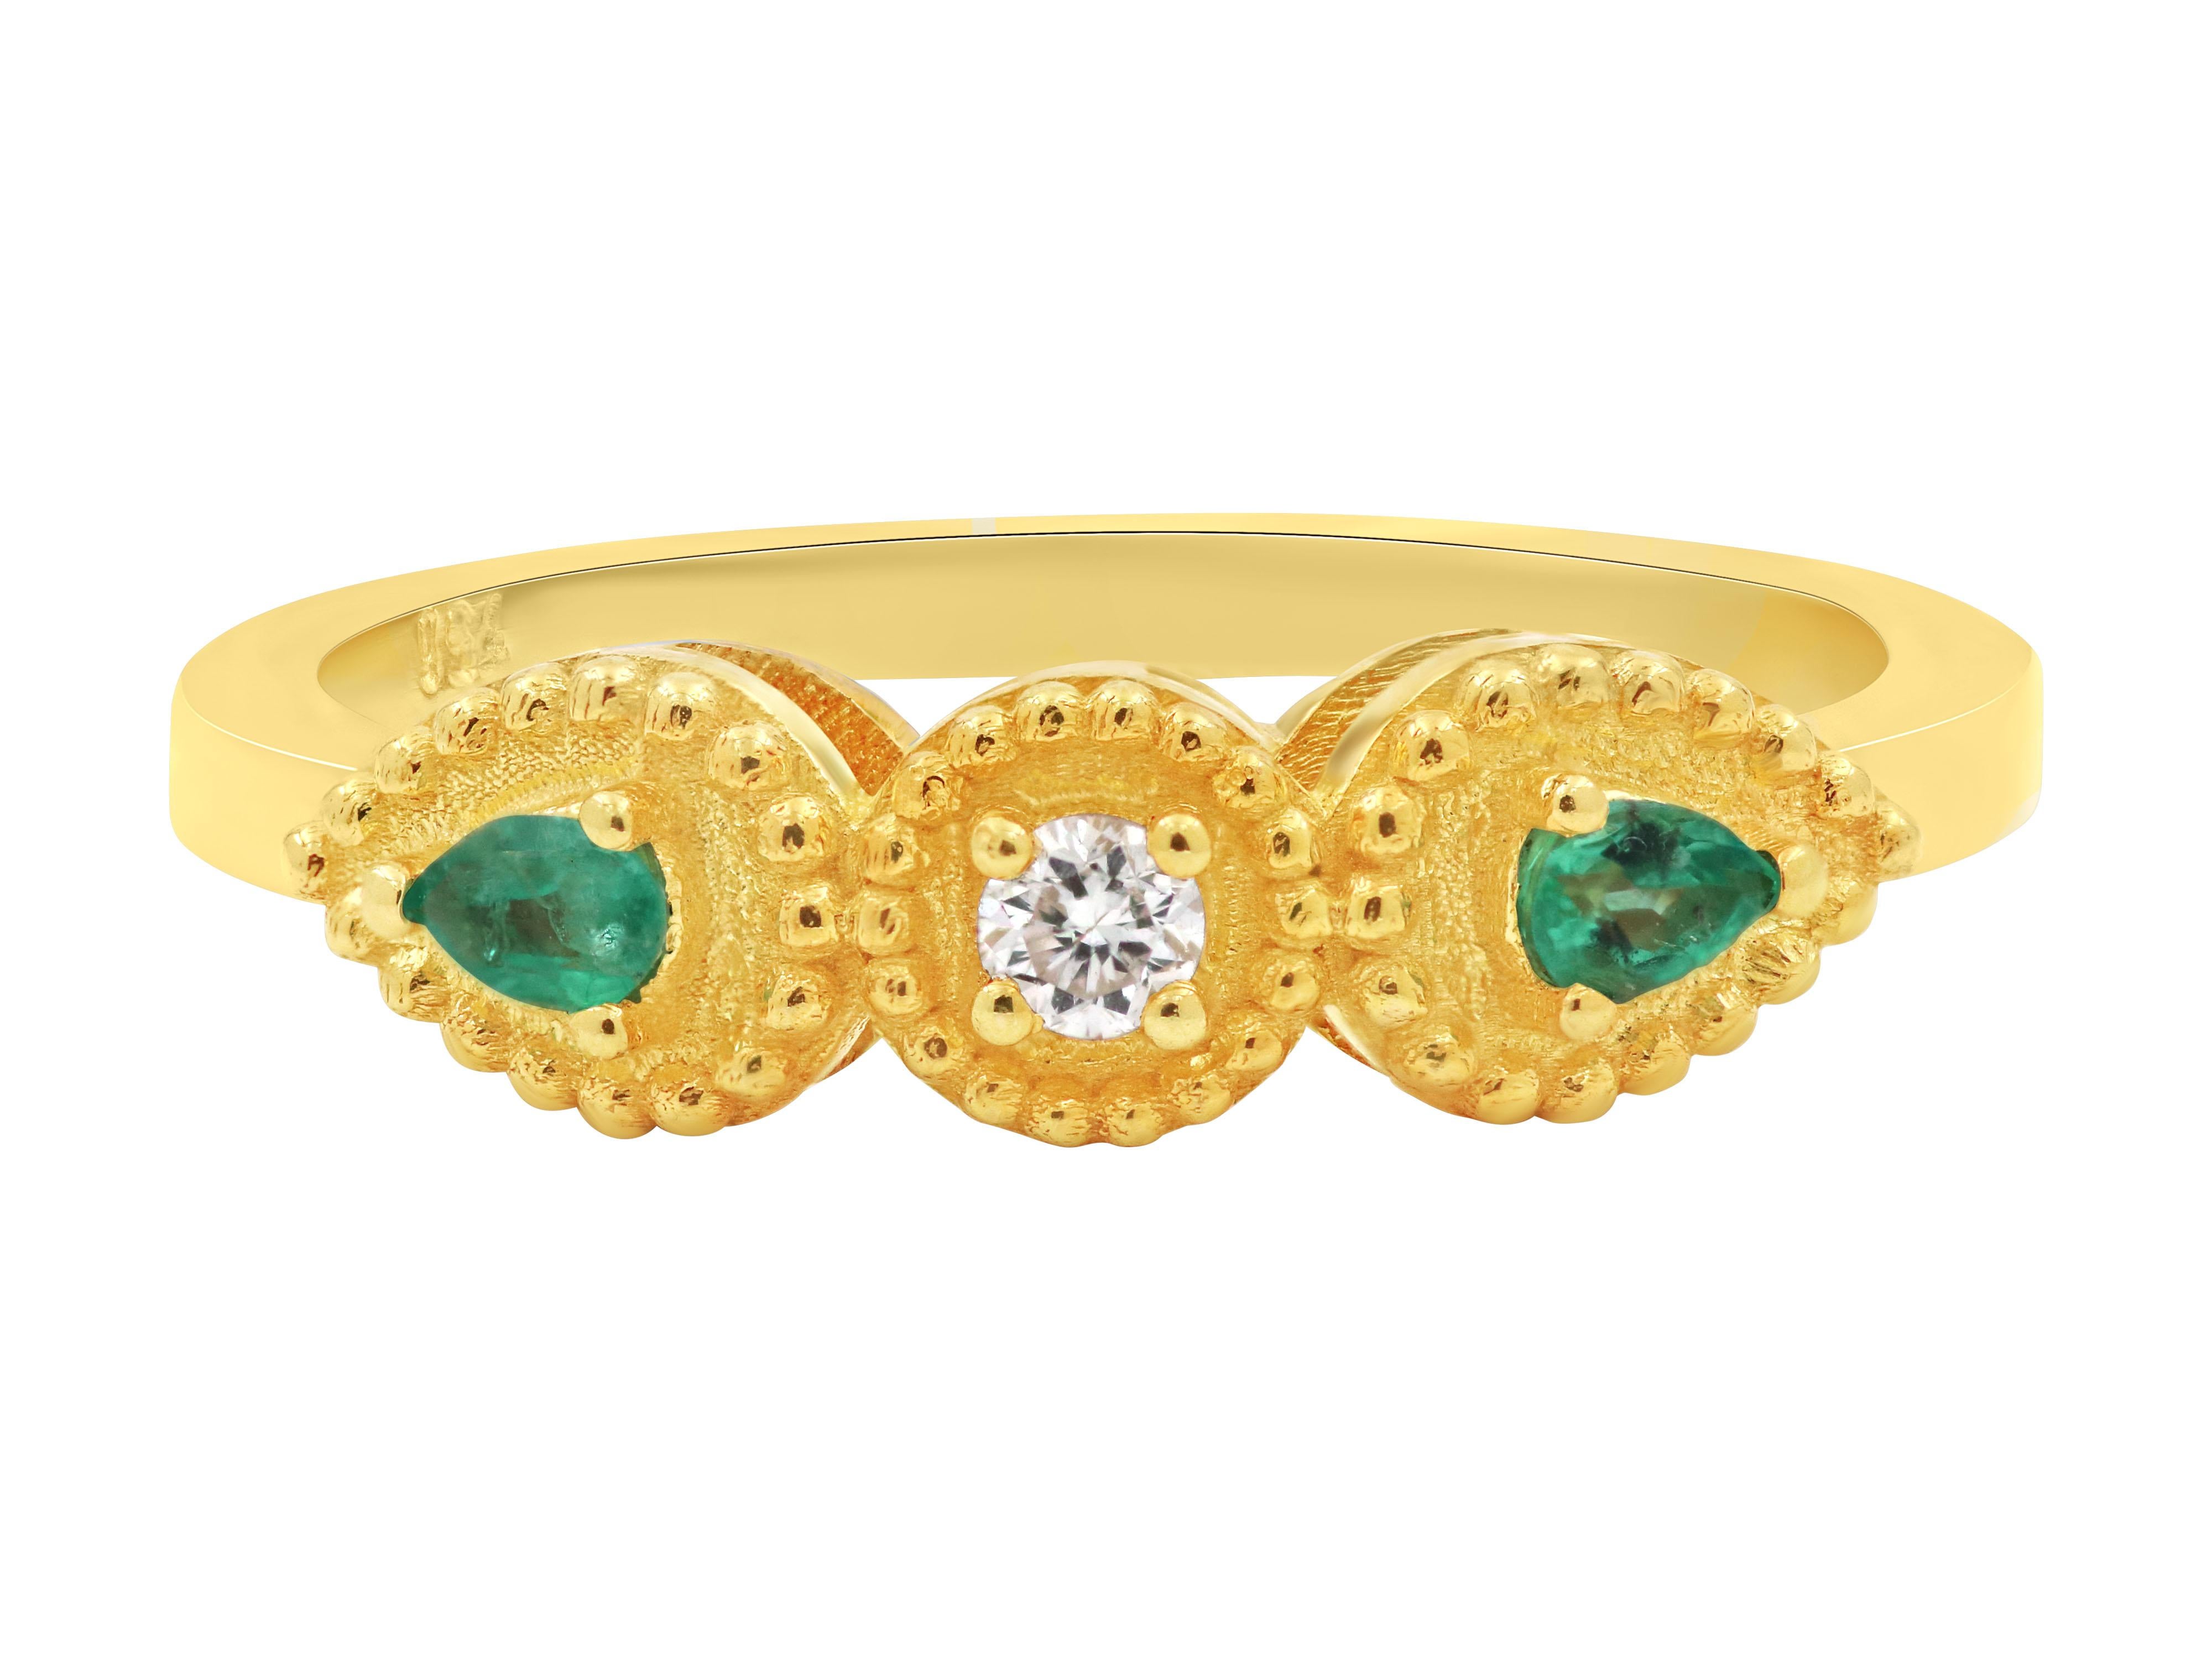 A neoclassic ring in 18k gold with 0.12 carats pear-cut emeralds and 0.04 carats brilliant diamond. The neoclassic design style blends classical elements with contemporary aesthetics, resulting in a timeless and versatile ring. It can be worn for